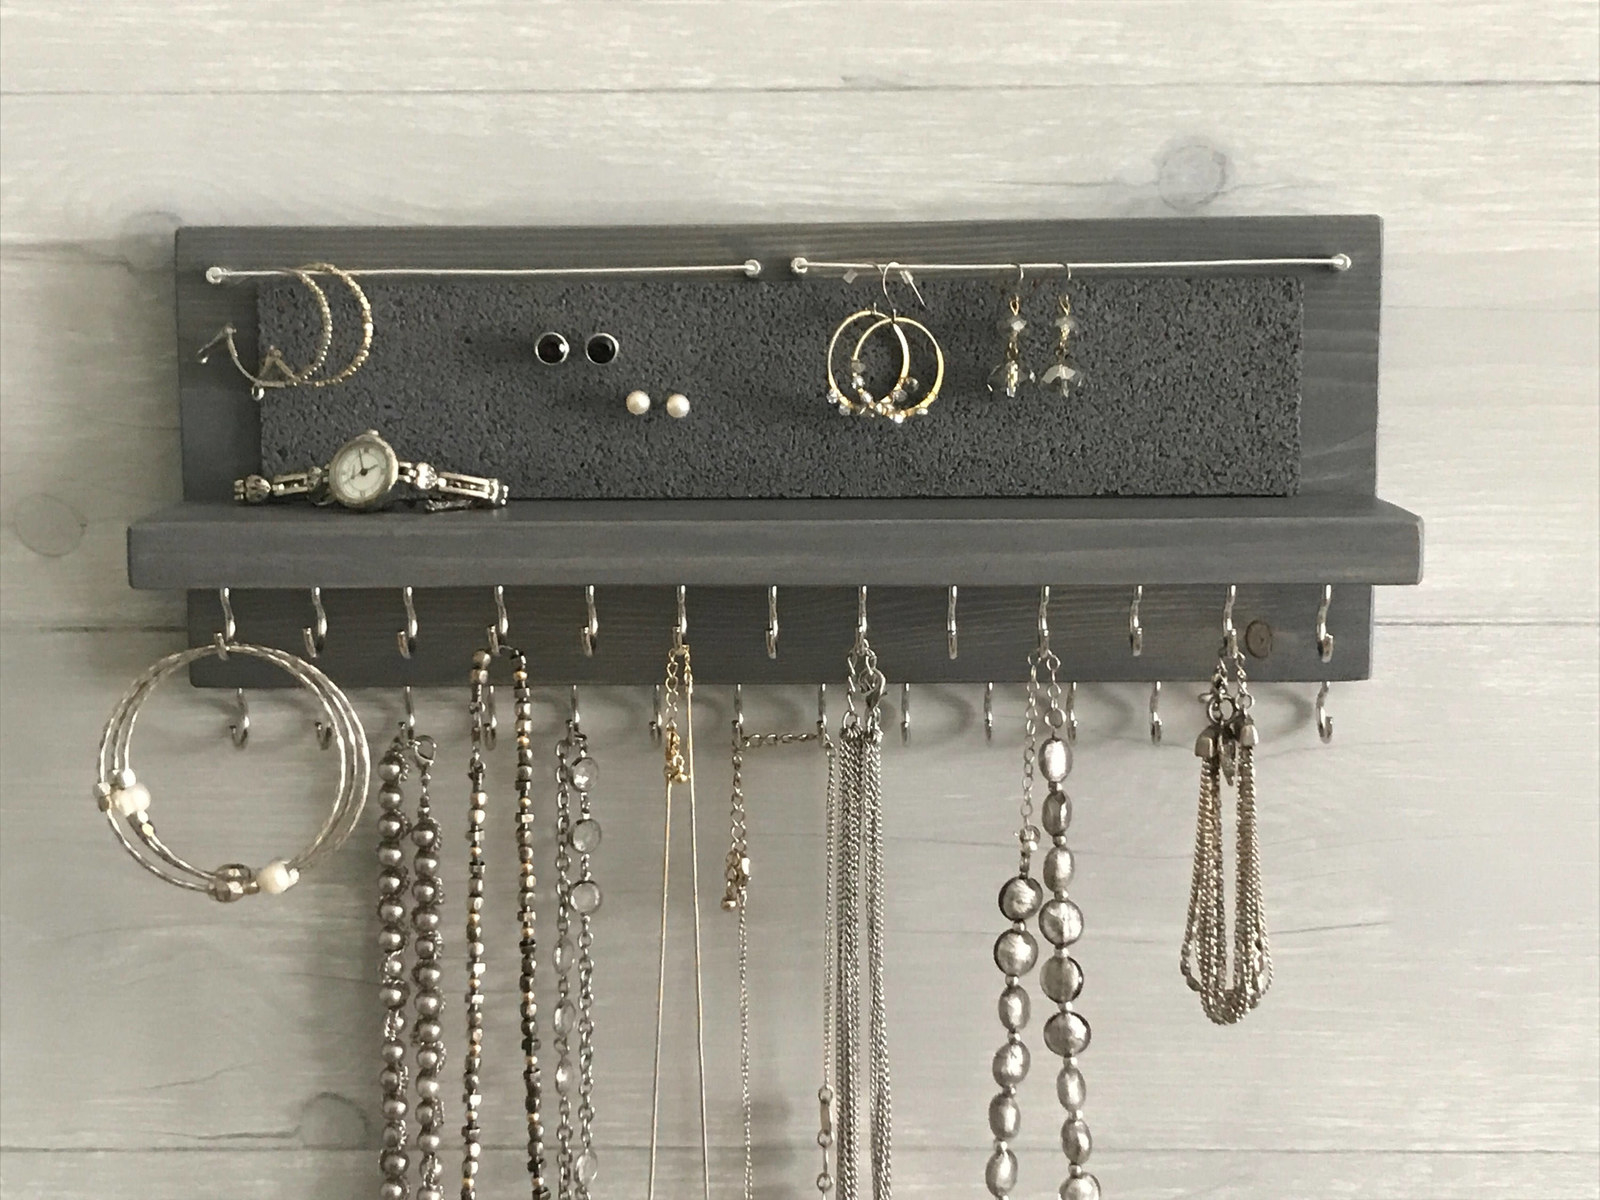 wood organizer with small shelf, cork section for stud earrings, wire section for dangle earrings, and two rows of 13 hooks for necklaces and bracelets